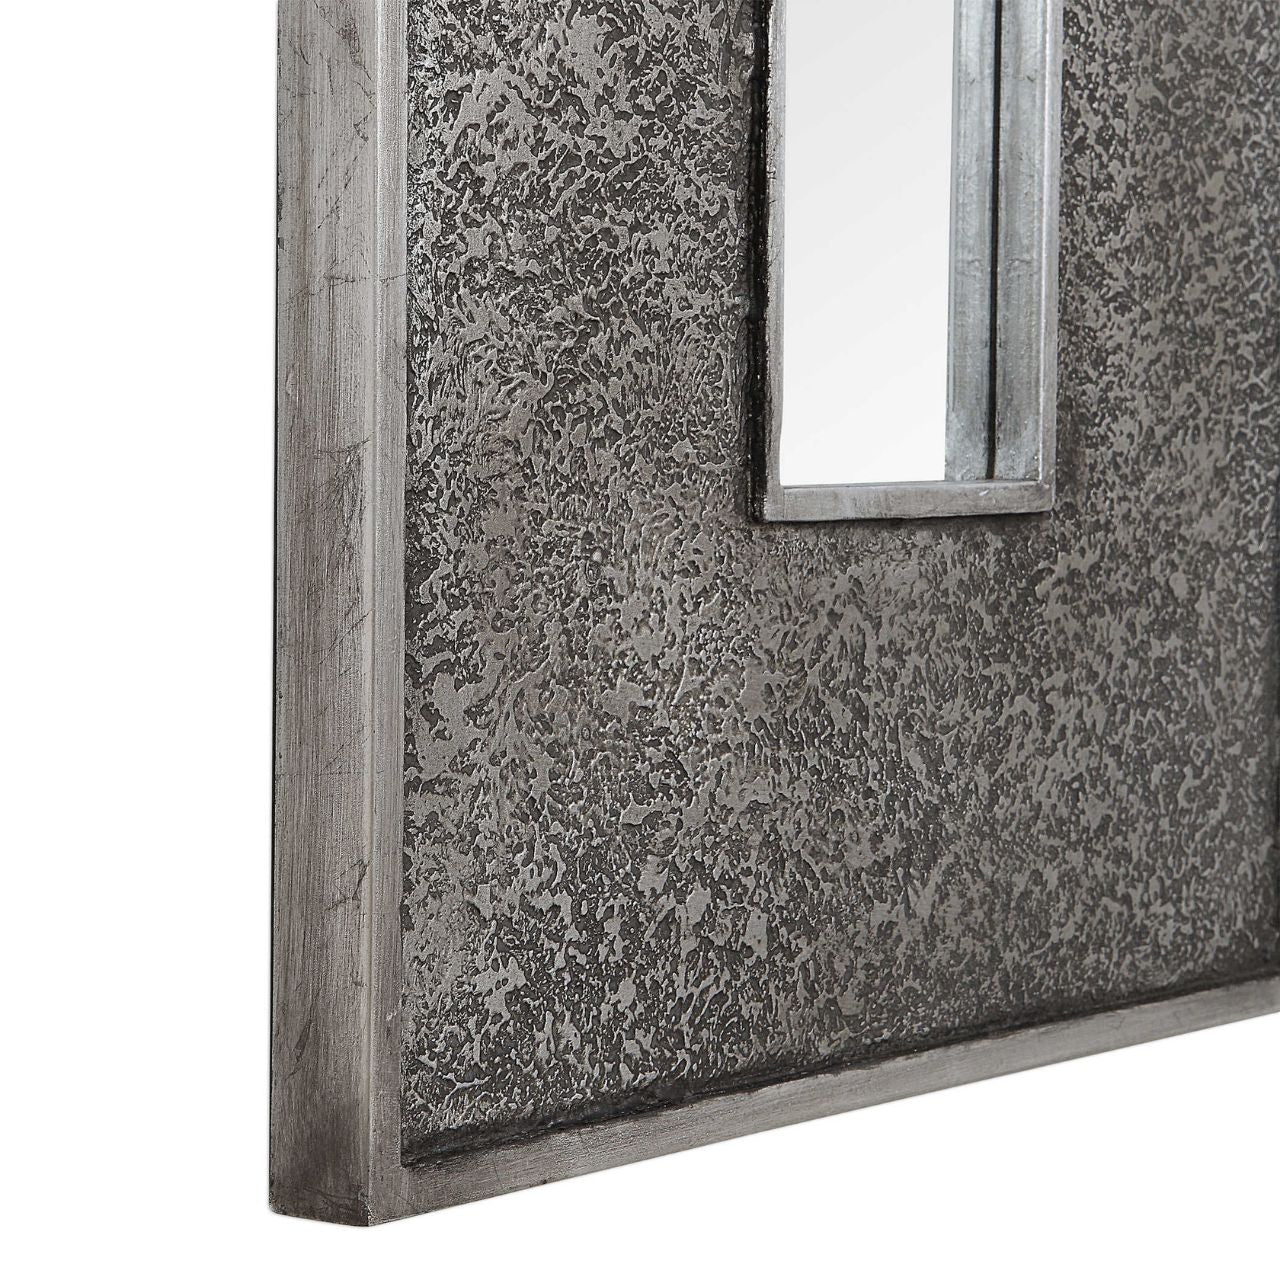 Bannon Mirror by Mindy Brownes - NEW  This rectangular mirror features a heavily textured surface finished in a metallic silver leaf with a heavy charcoal wash over a solid wood construction. This contemporary design boasts a great profile for showing individually or multiple for a bold statement. The mirror is bevelled and can hang vertically and horizontally.